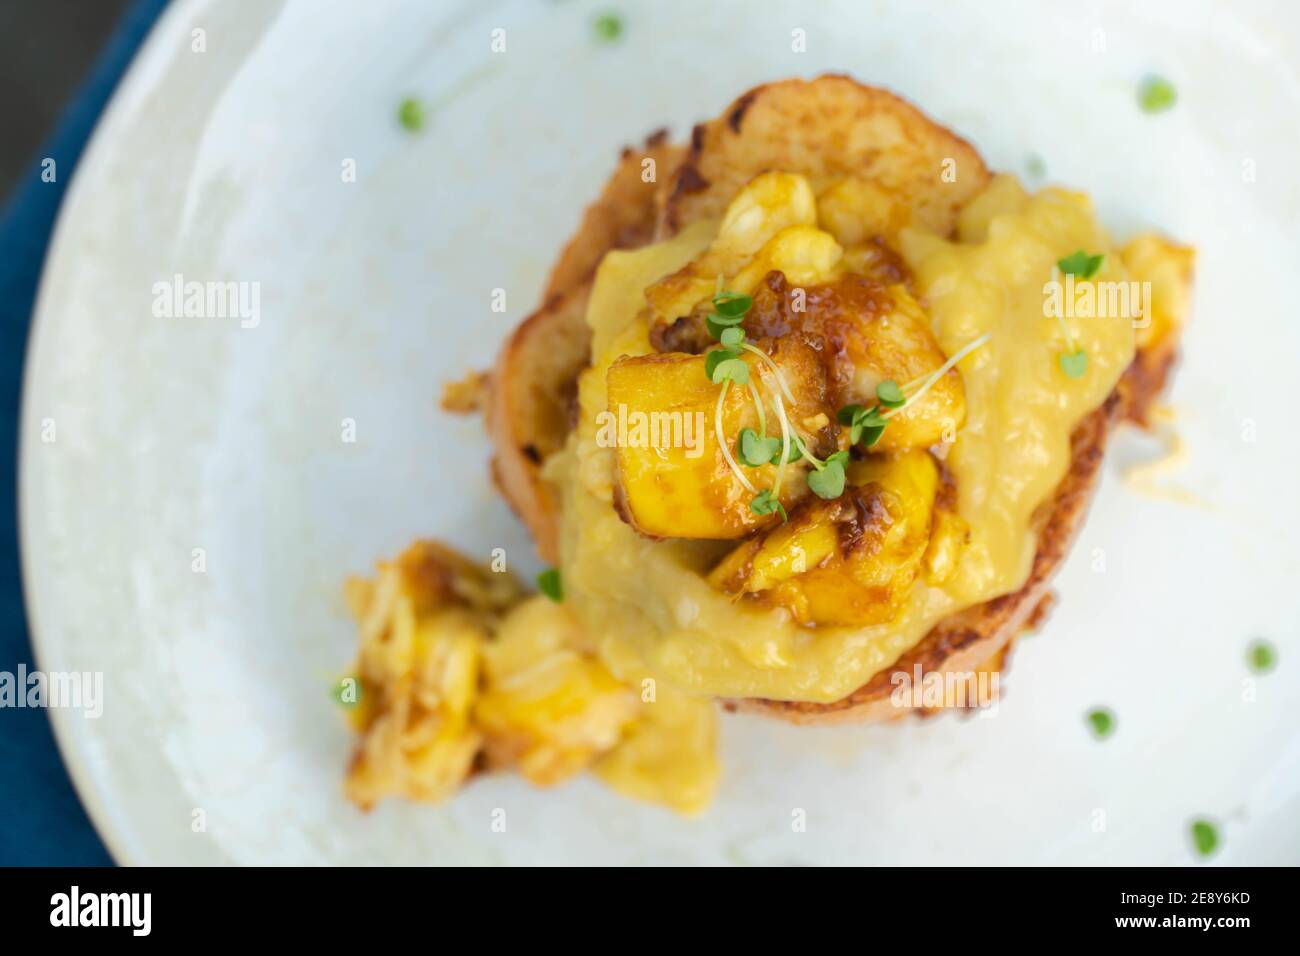 Vegan french toasts with peanut butter, syrup and banana on a white plate. Stock Photo